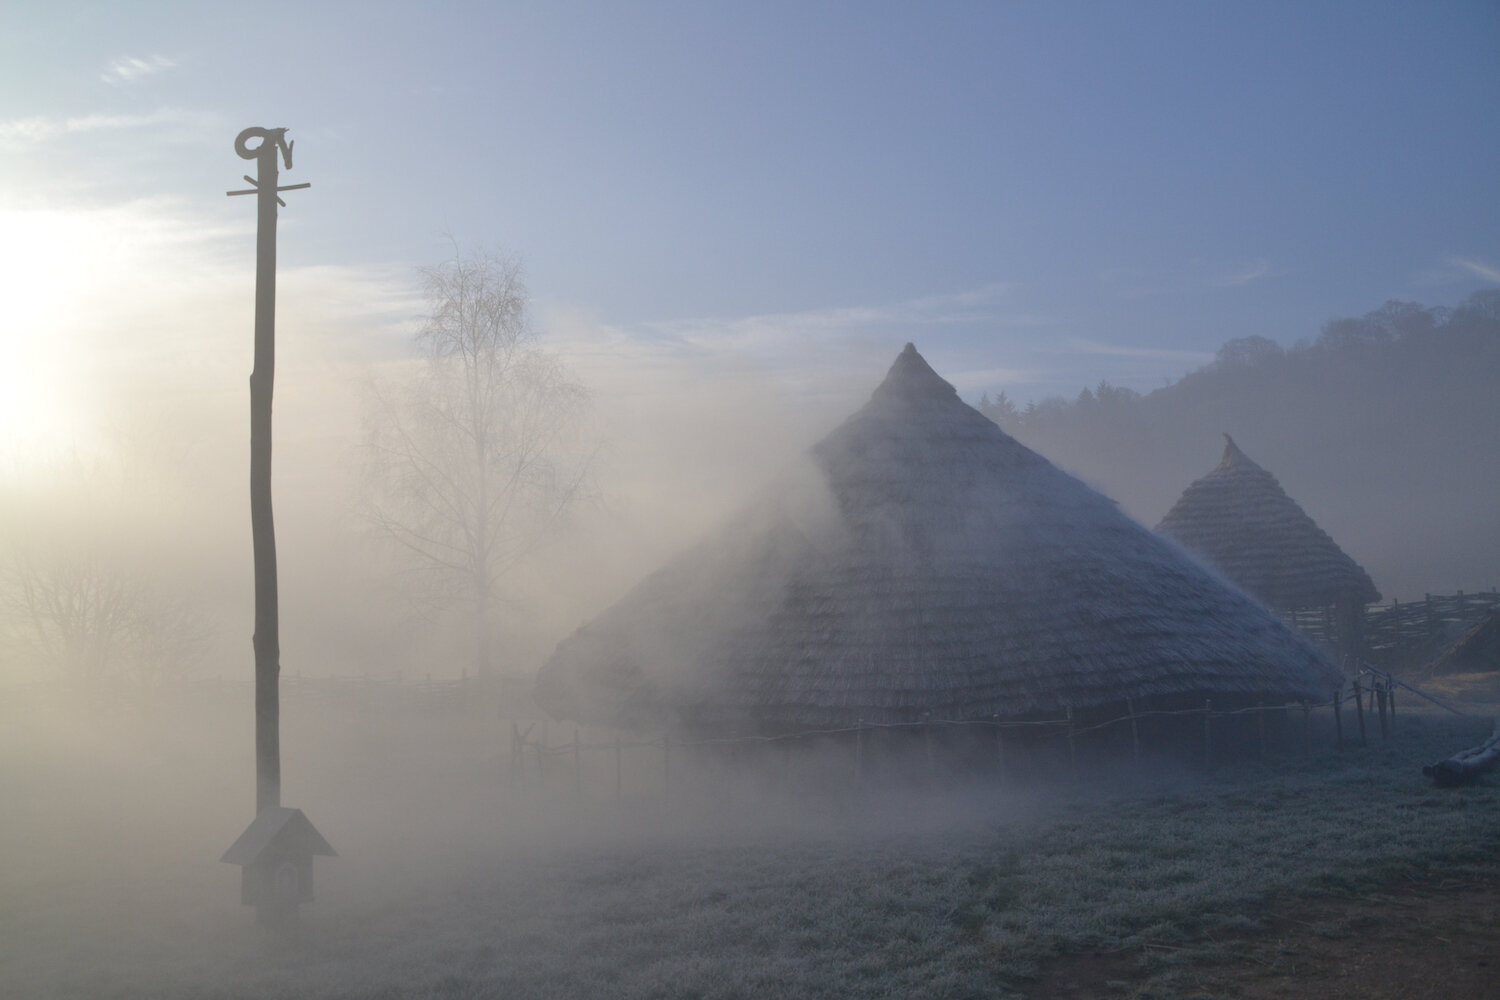 Butser Ancient Farm Iron Age Roundhouse in mist